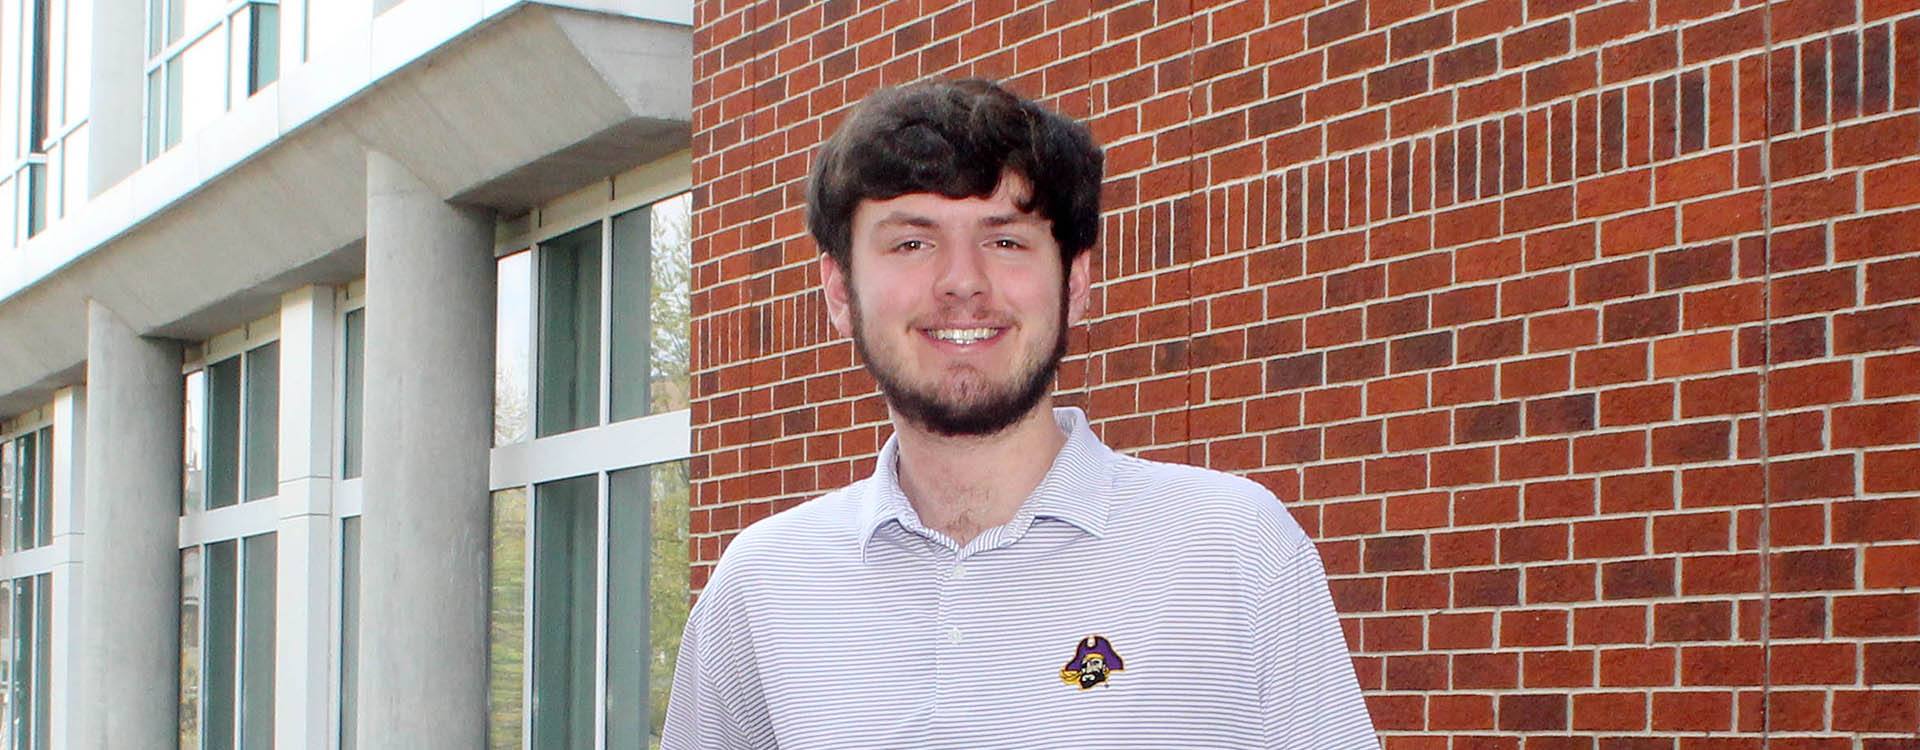 ECU engineering student James Miller has received a SMART scholarship from the Department of Defense. The service for scholarship program will send Miller to Fleet Readiness Center East at Marine Corps Air Station Cherry Point for internships, and eventually, full-time employment. (Photo by Ken Buday)